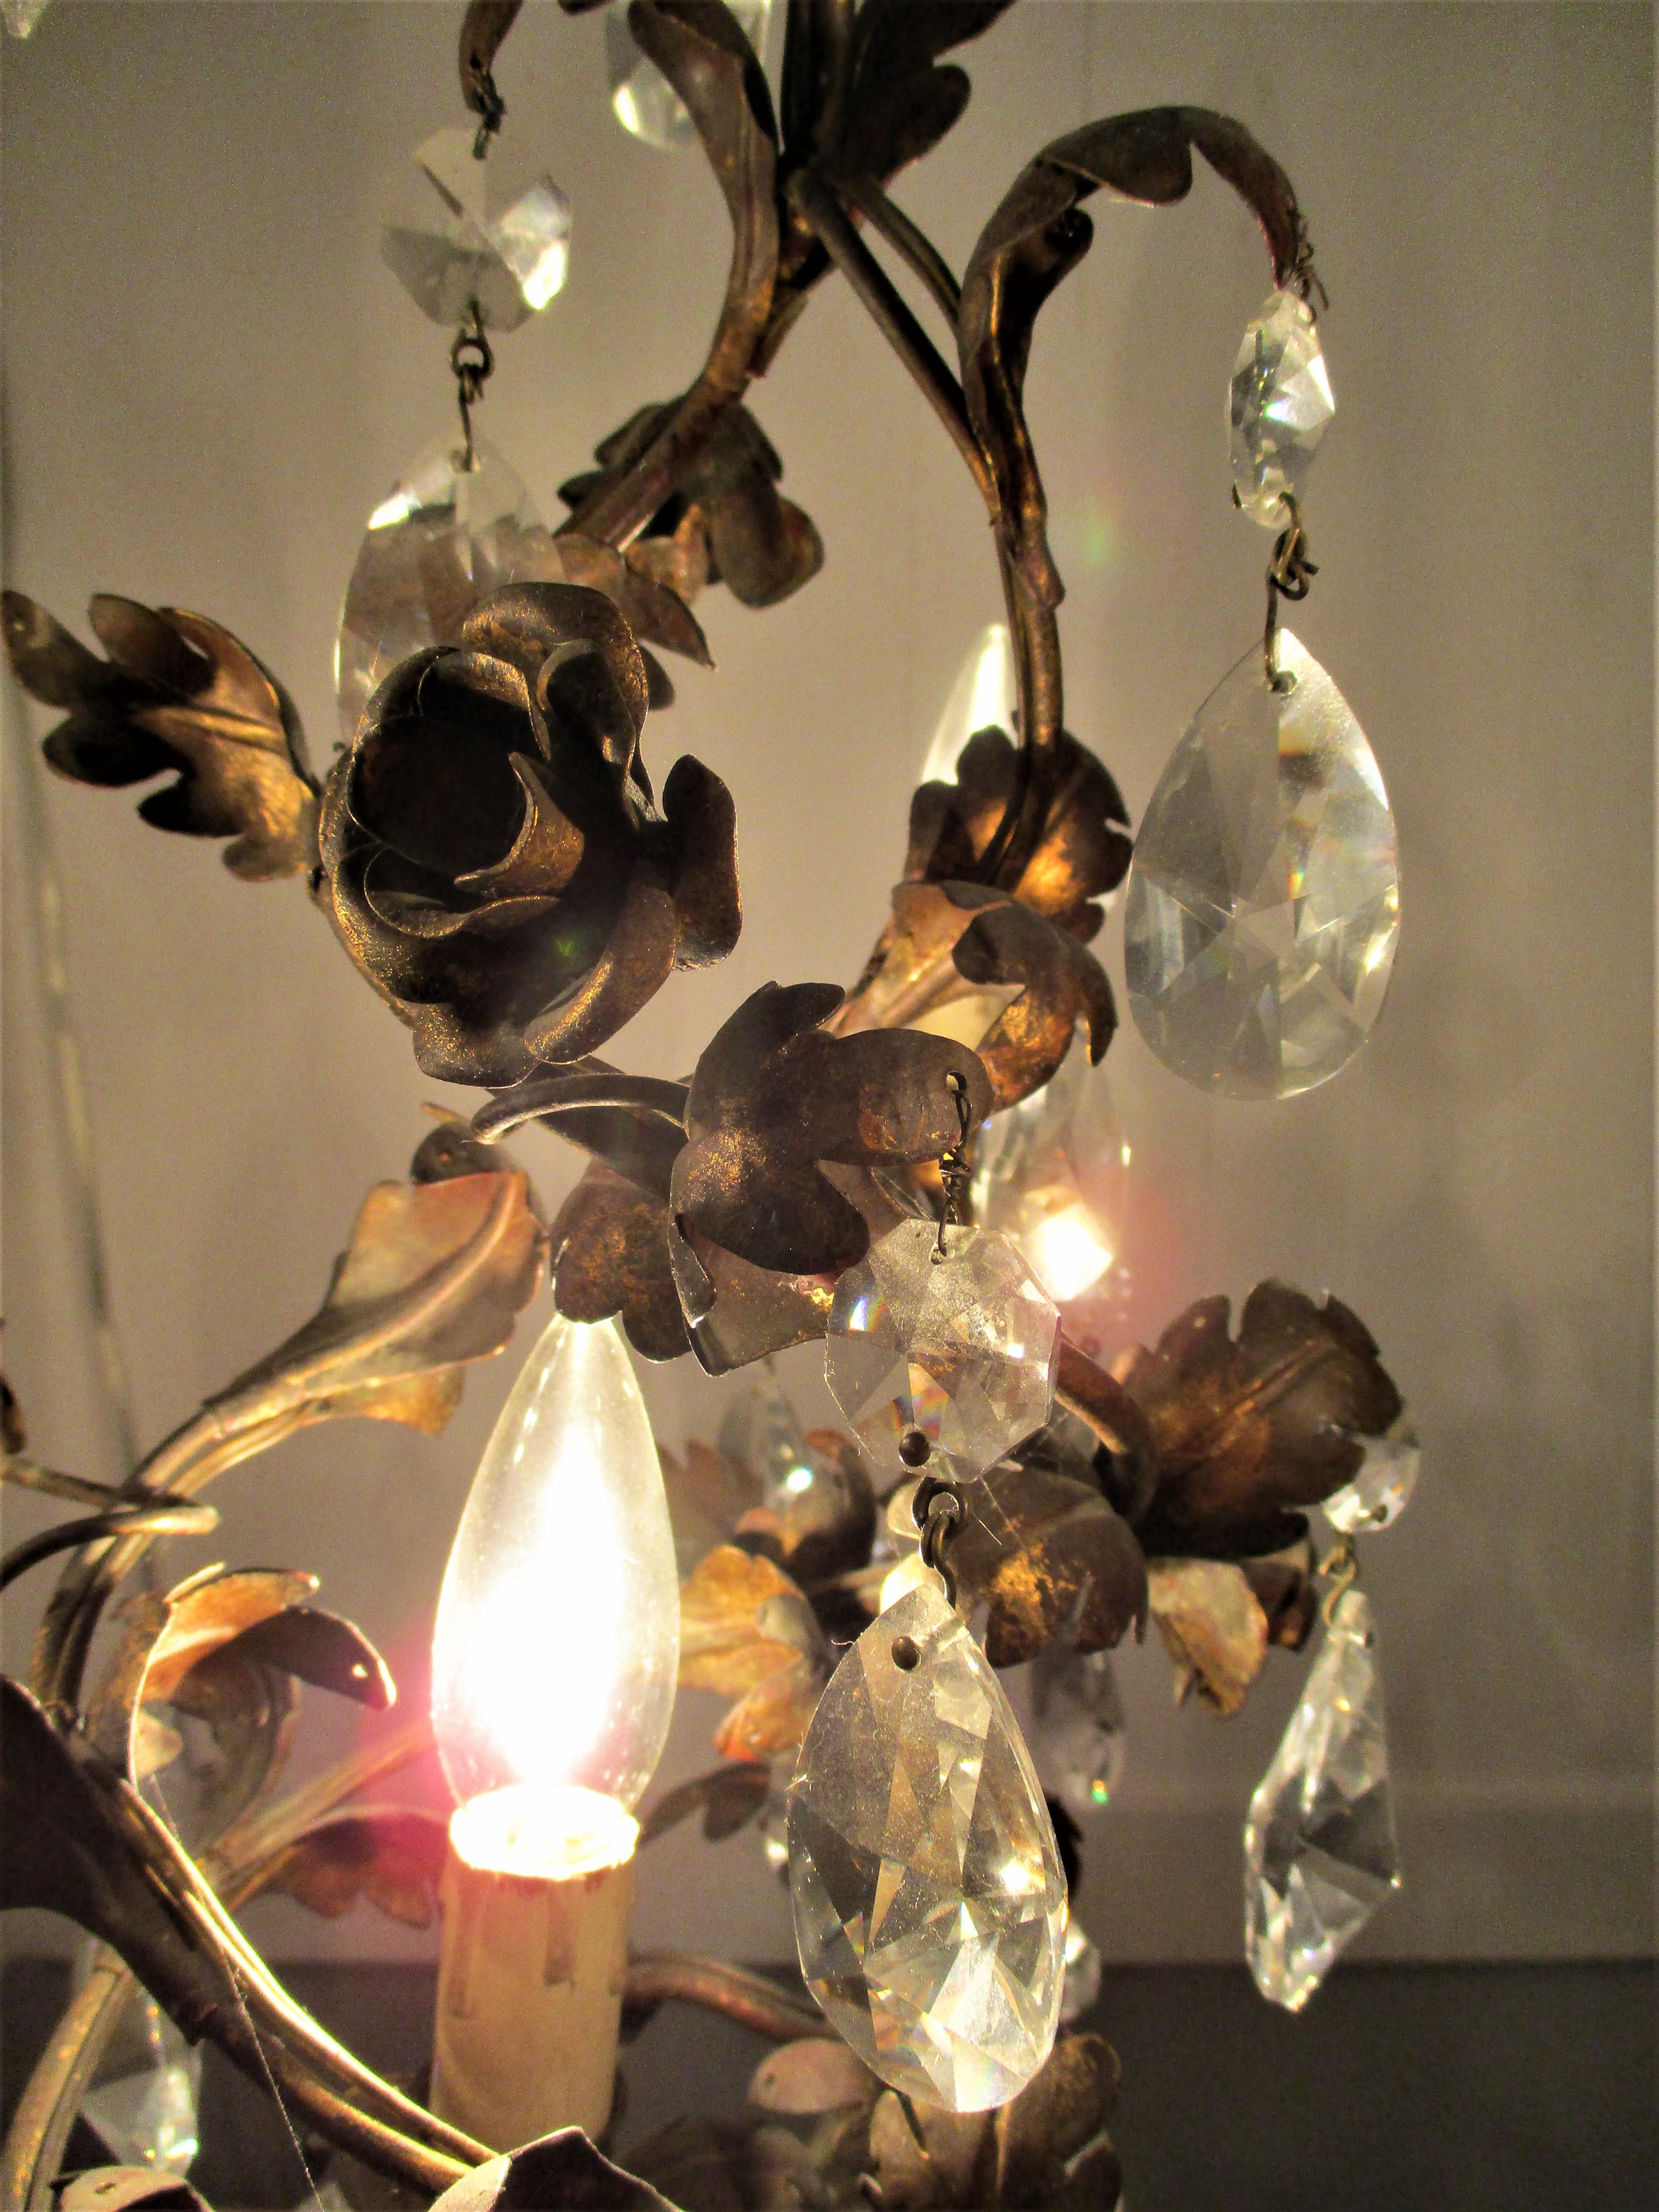 This gorgeous French 4-light, tole Strass crystal chandelier is one of a kind. The brilliance of the crystals sparkling amongst the aged gilt tole leaves and roses is magical.